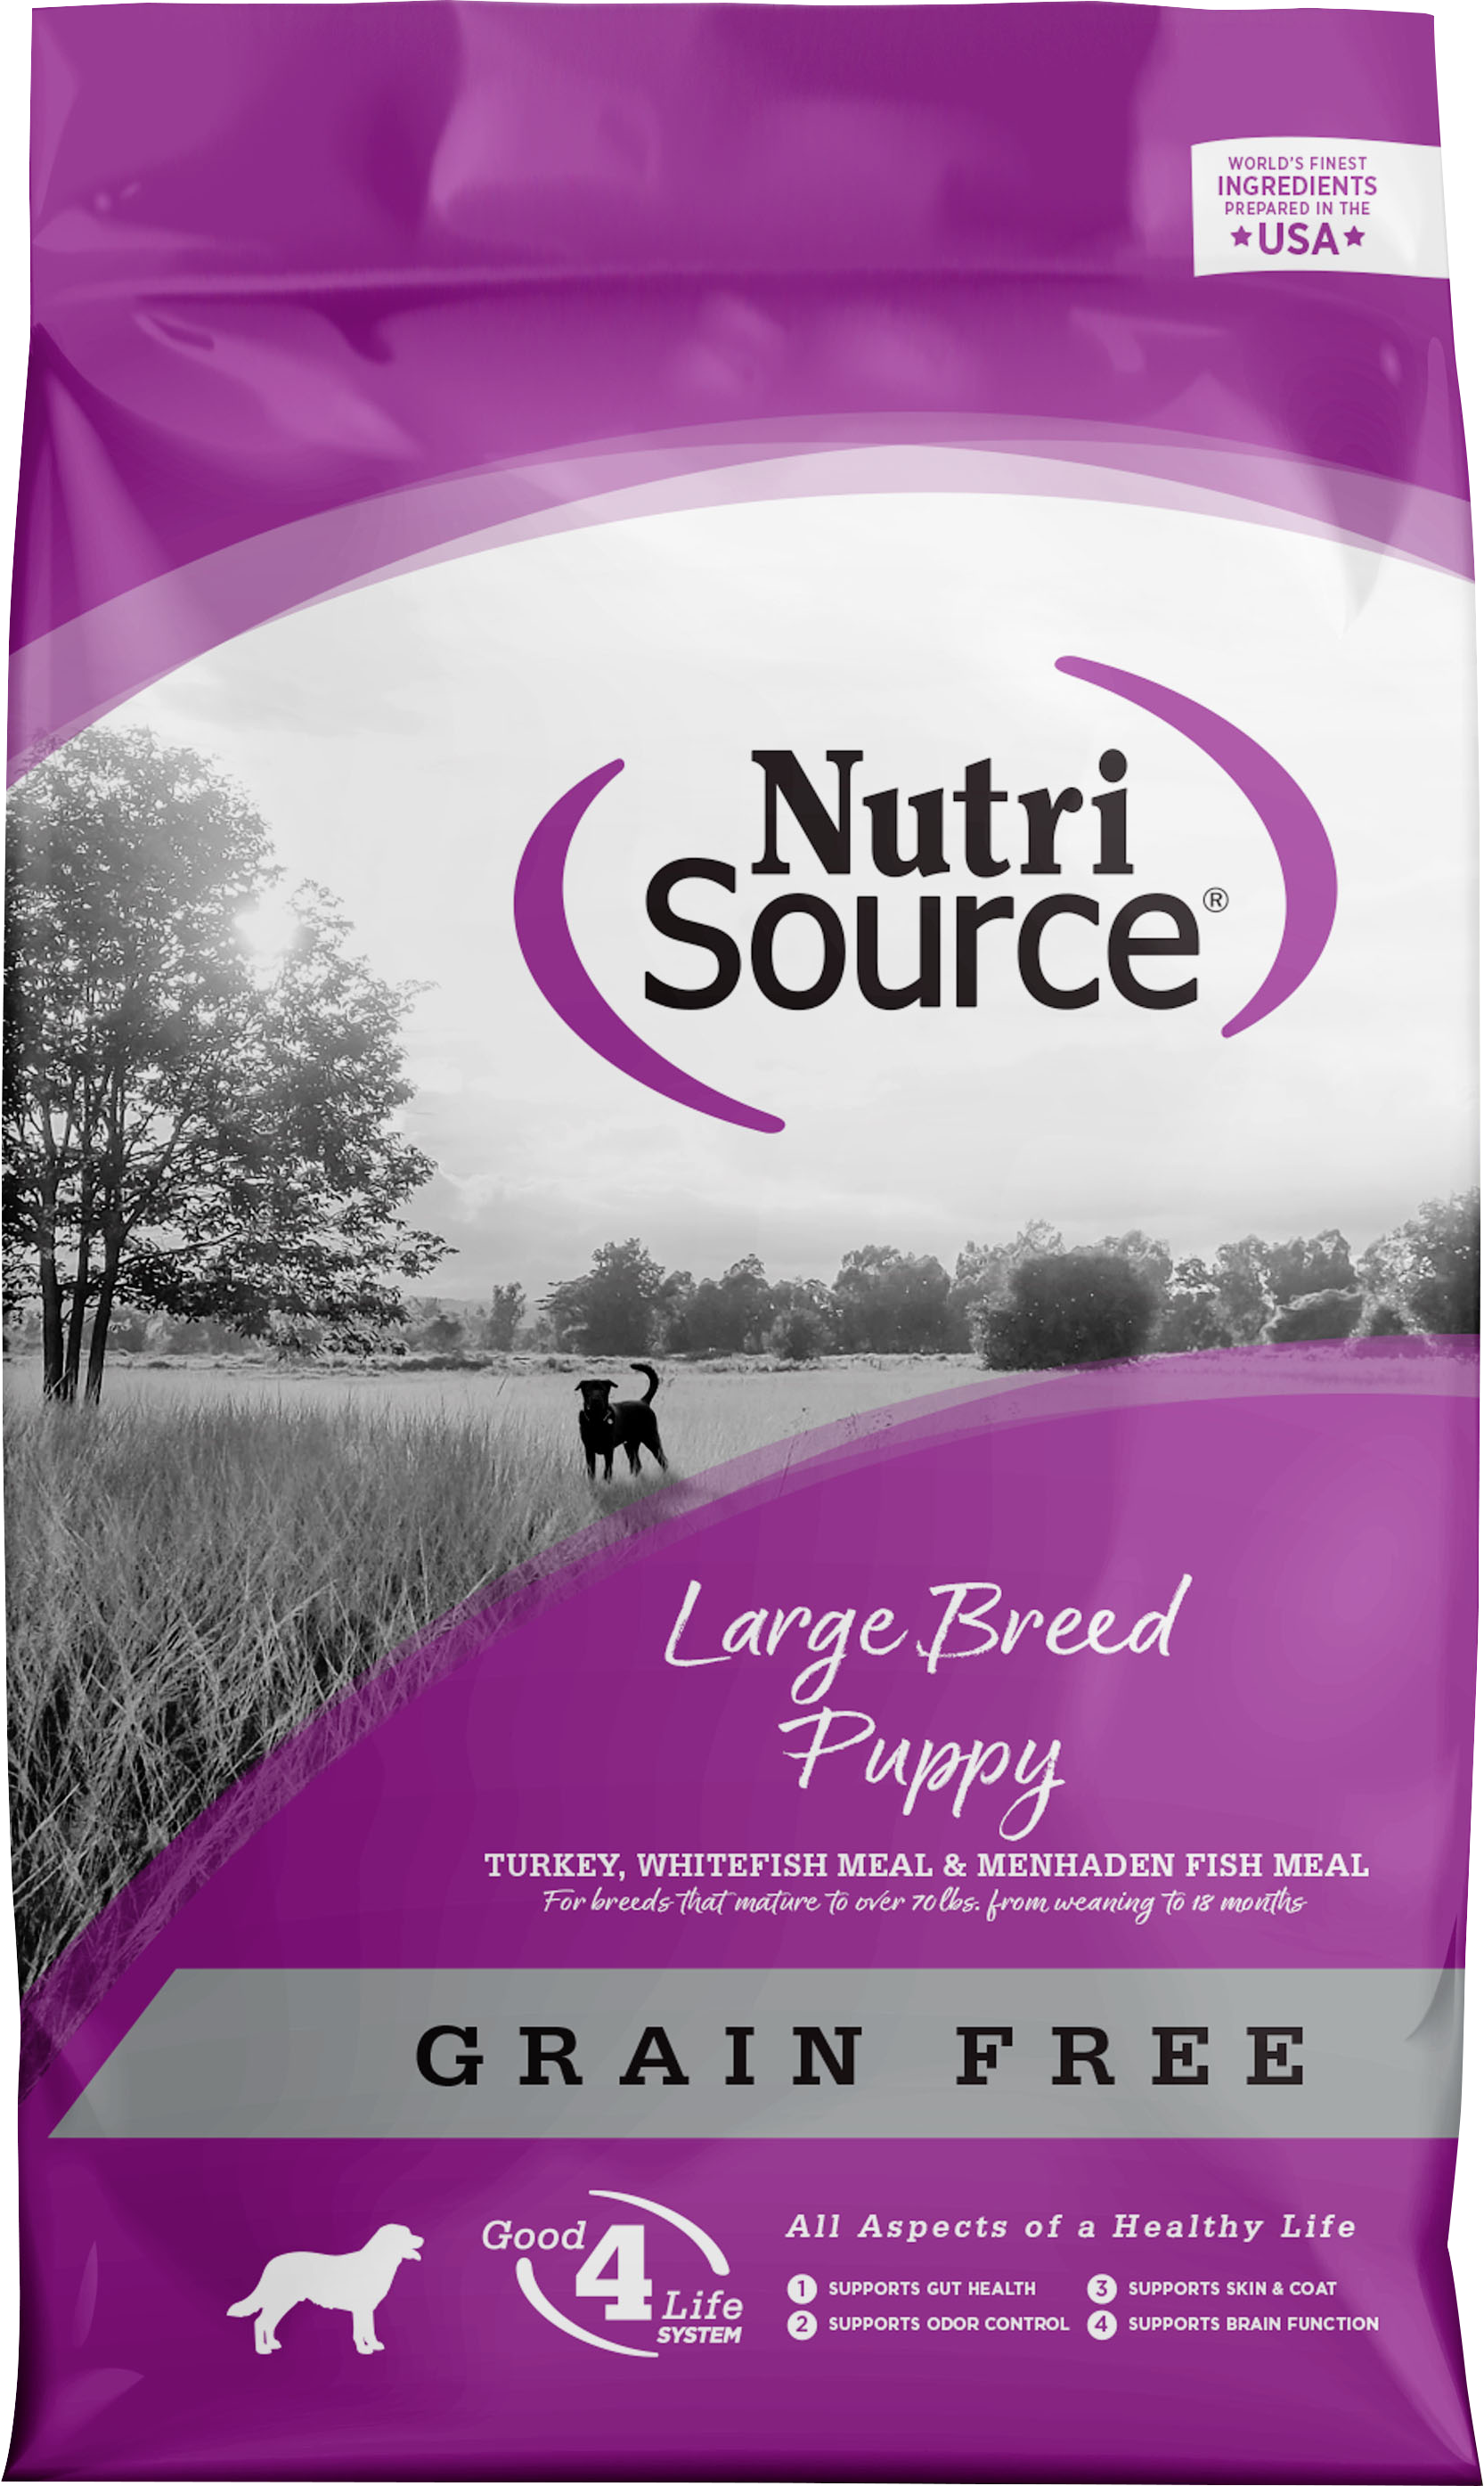 Nutrisource Large Breed Puppy Grain Free Dry Dog Food